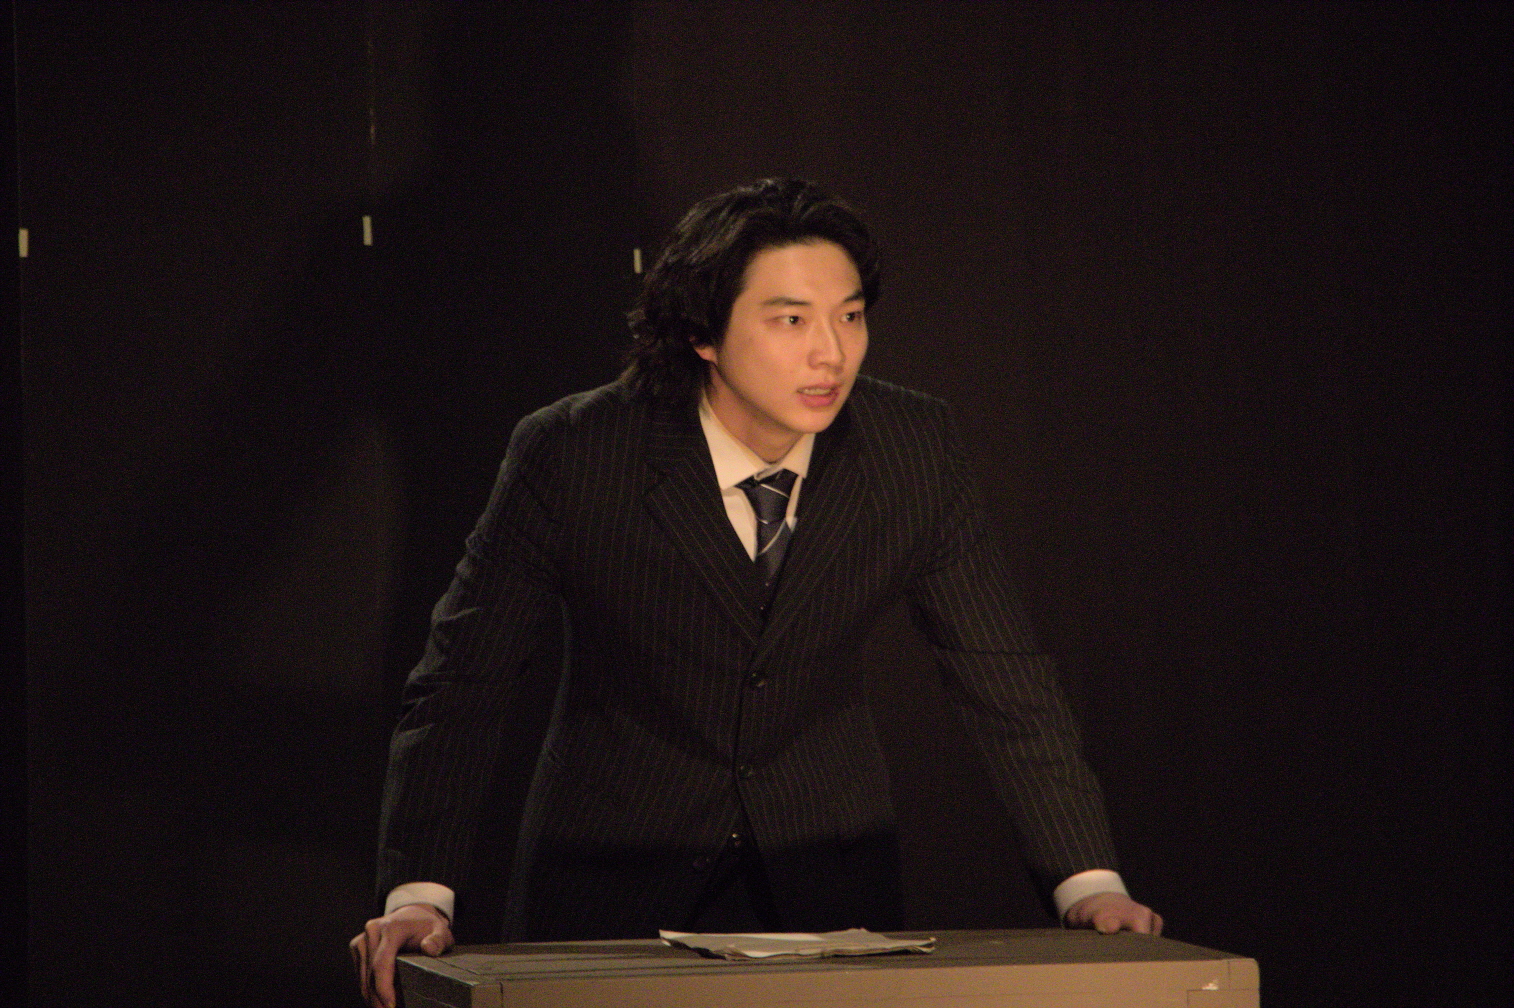 Jang Ji-Woon, Sangmyung University's student from Department of Theatre, playing a role of Dr. Thomas Stockmann for El folkefiende